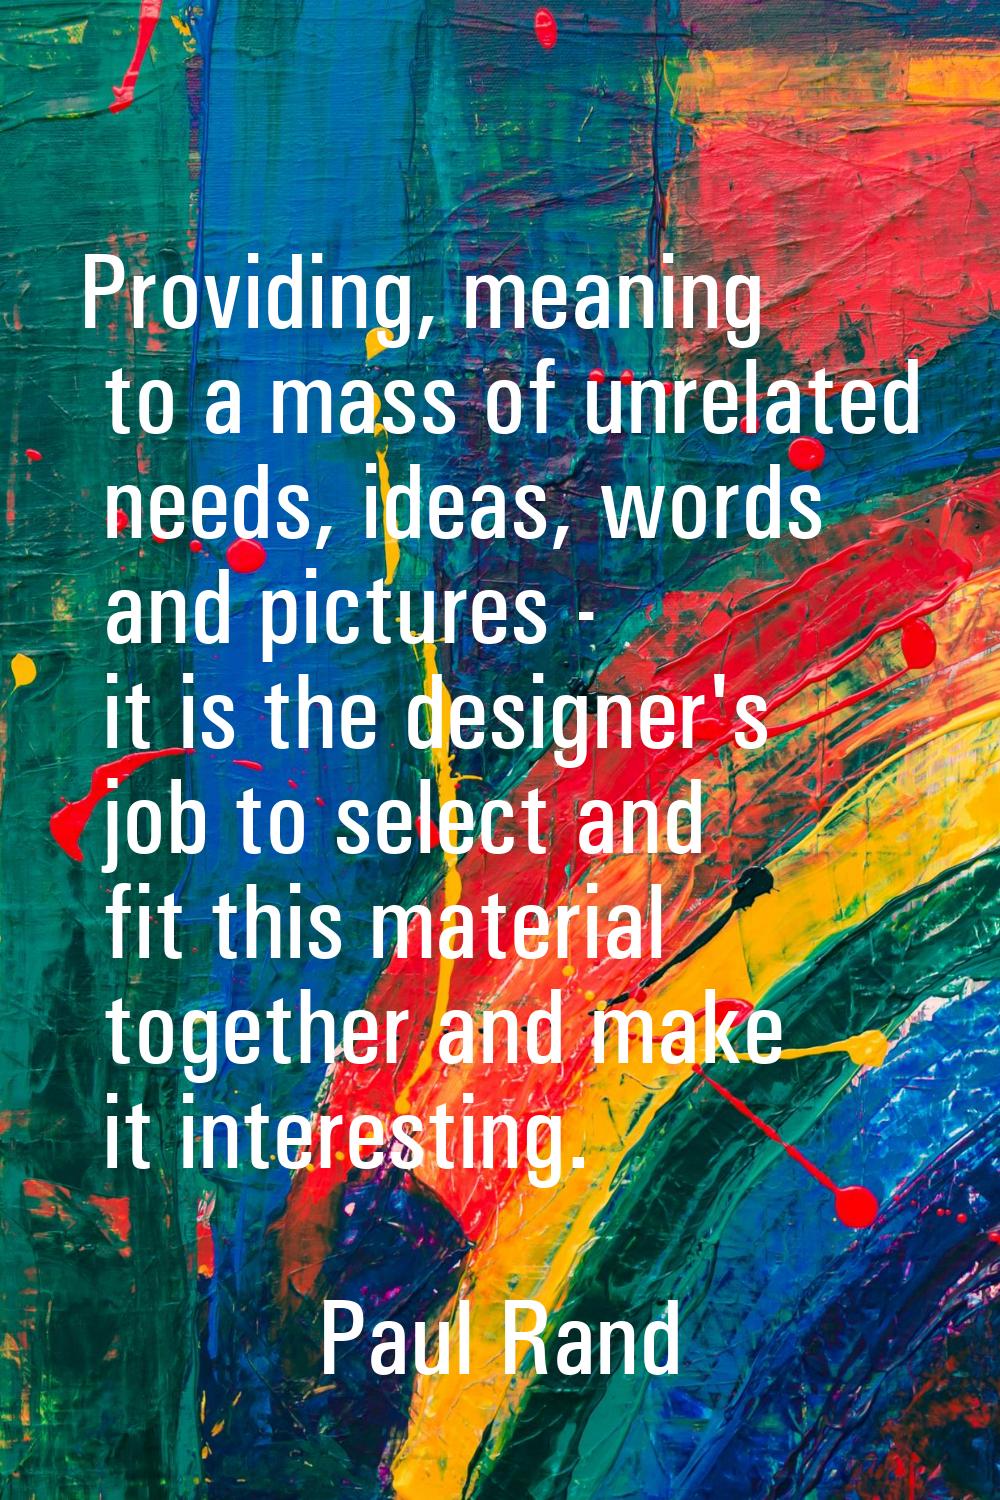 Providing, meaning to a mass of unrelated needs, ideas, words and pictures - it is the designer's j